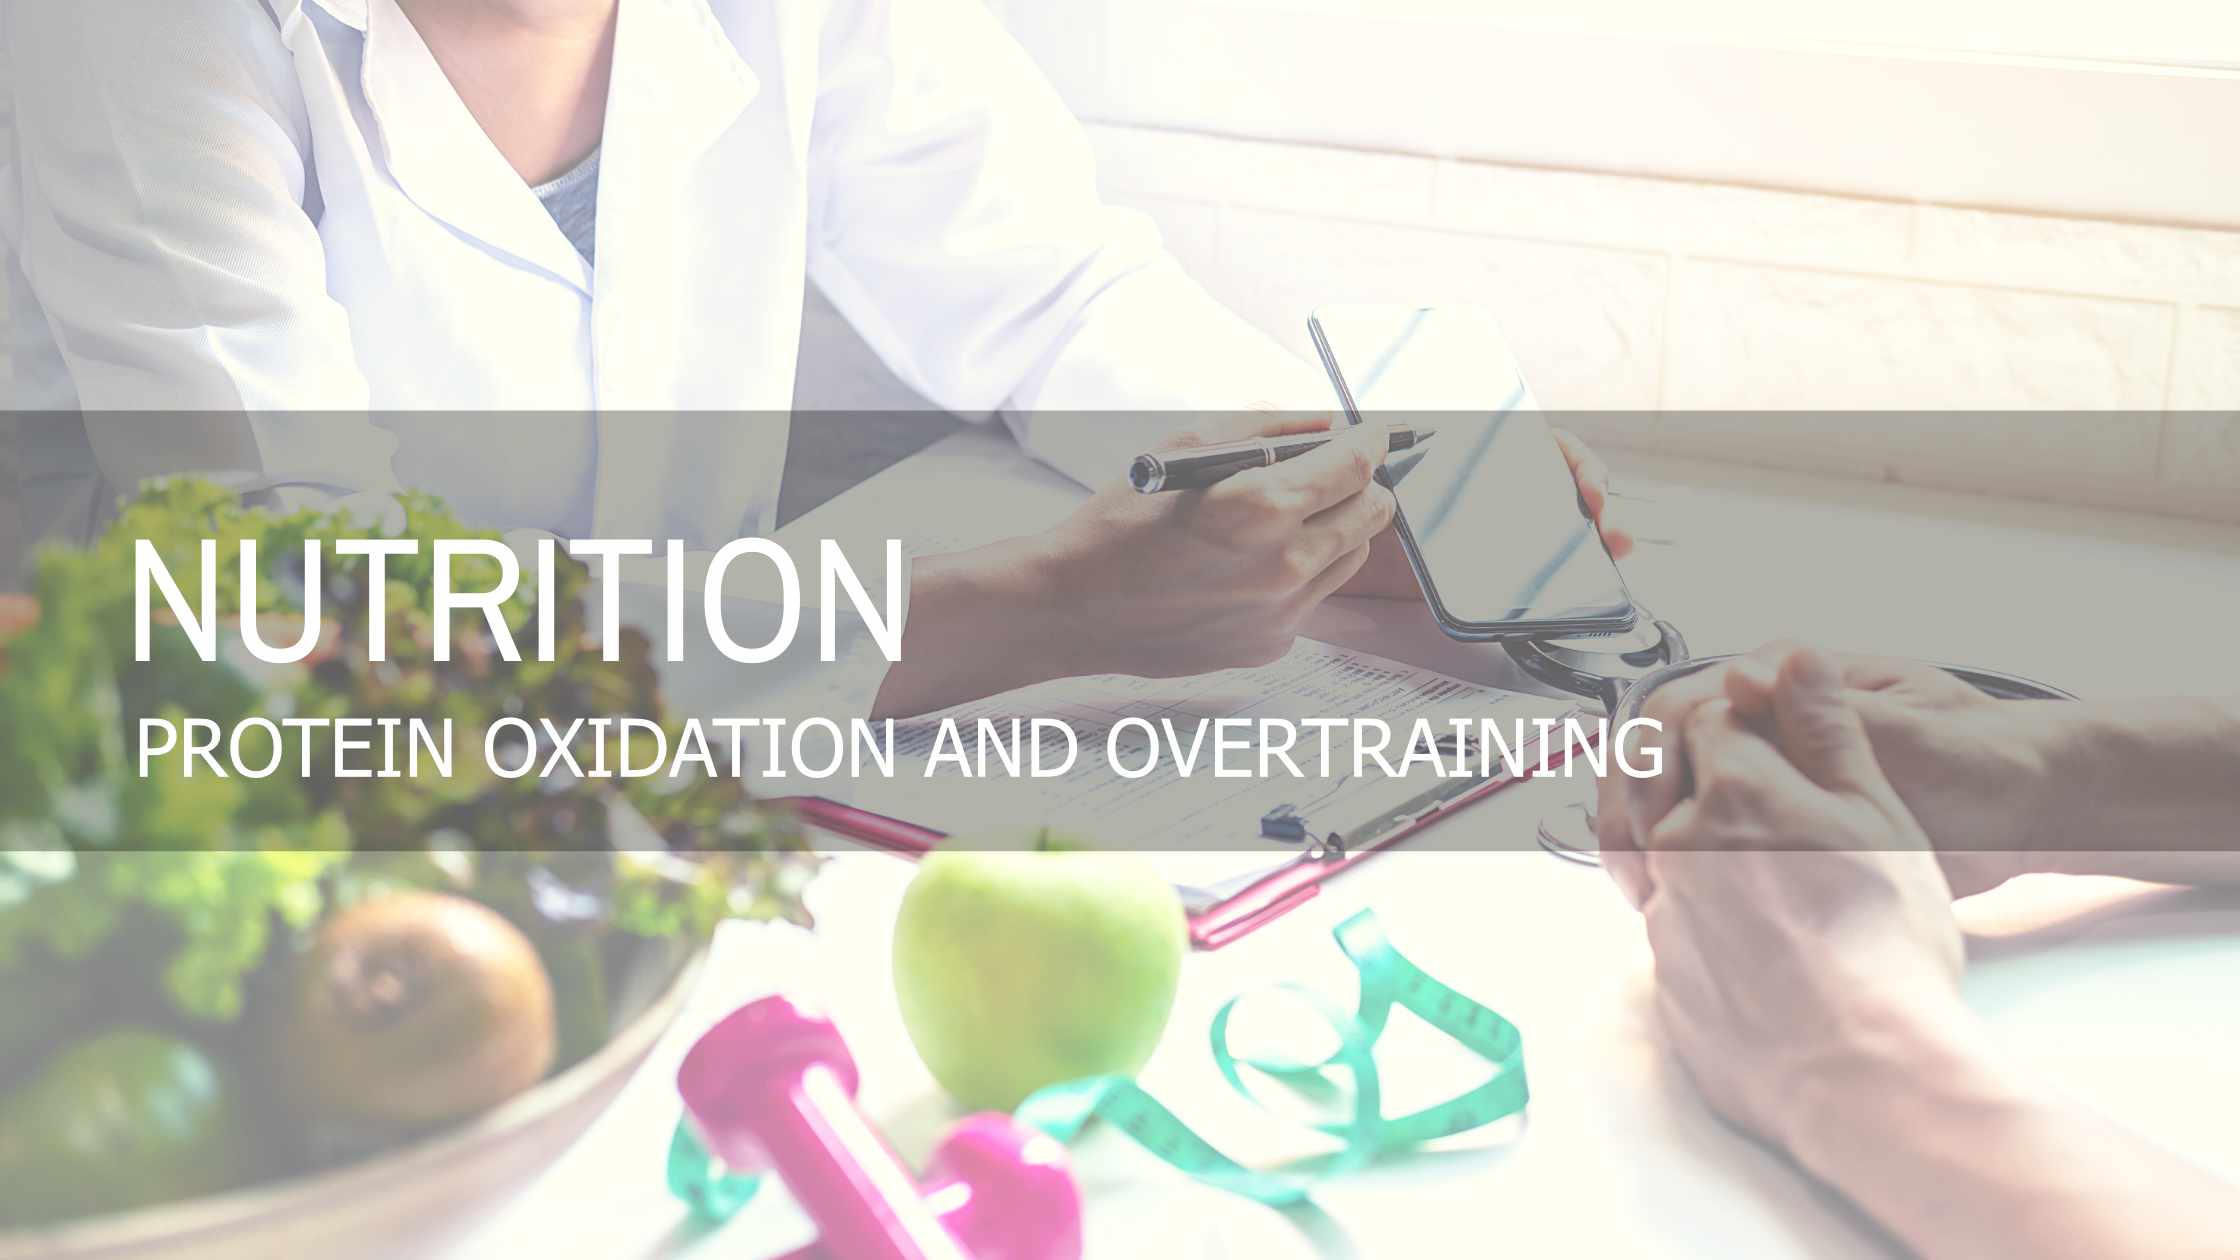 Metabolic Expression and Exercise | Protein Oxidation and Overtraining